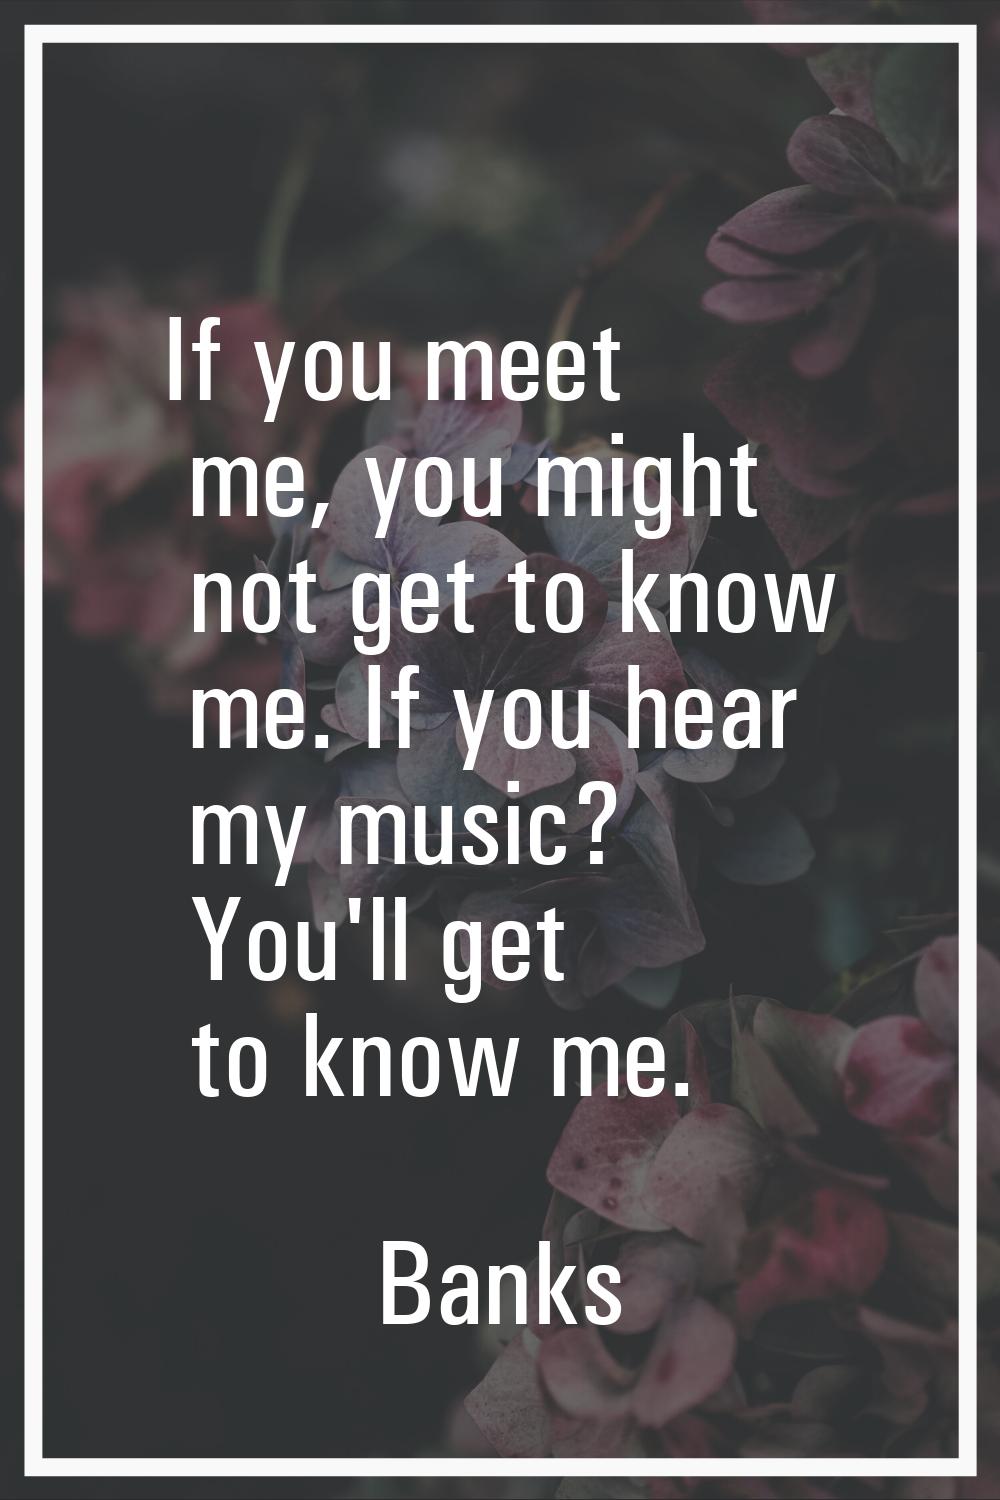 If you meet me, you might not get to know me. If you hear my music? You'll get to know me.